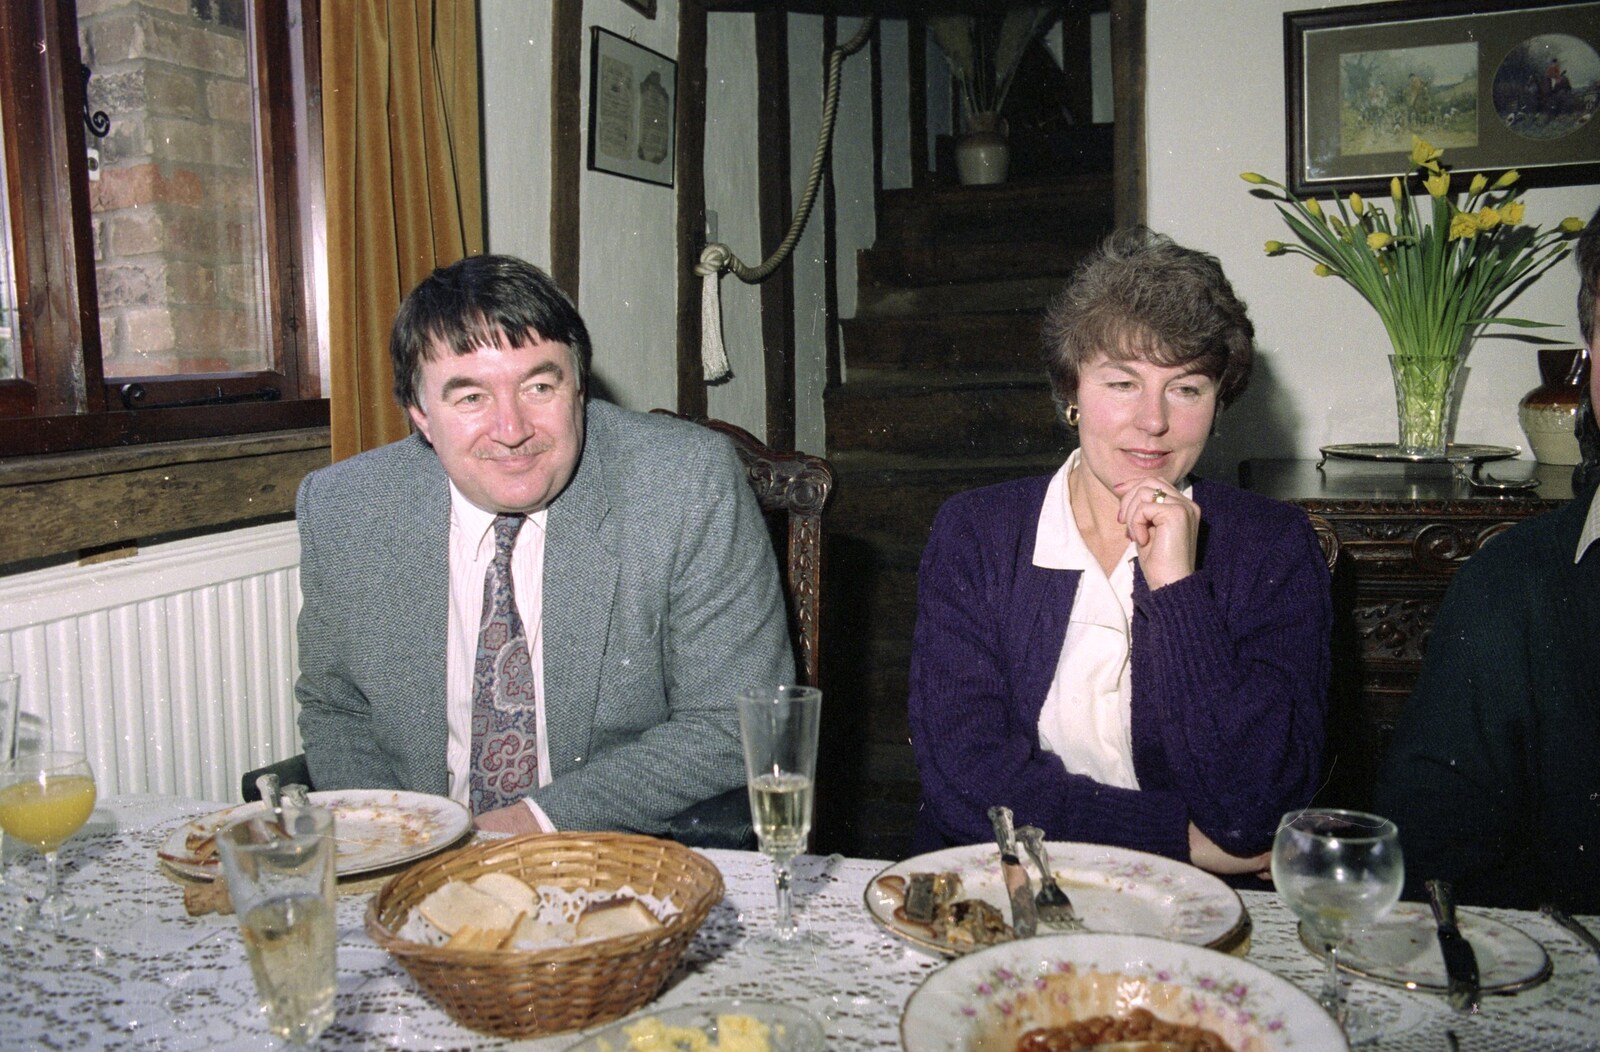 David Cork and Sue 'Badger' Ogilsby from Dinner Round Geoff and Brenda's, and Hamish Visits, Stuston, Suffolk - 6th April 1992